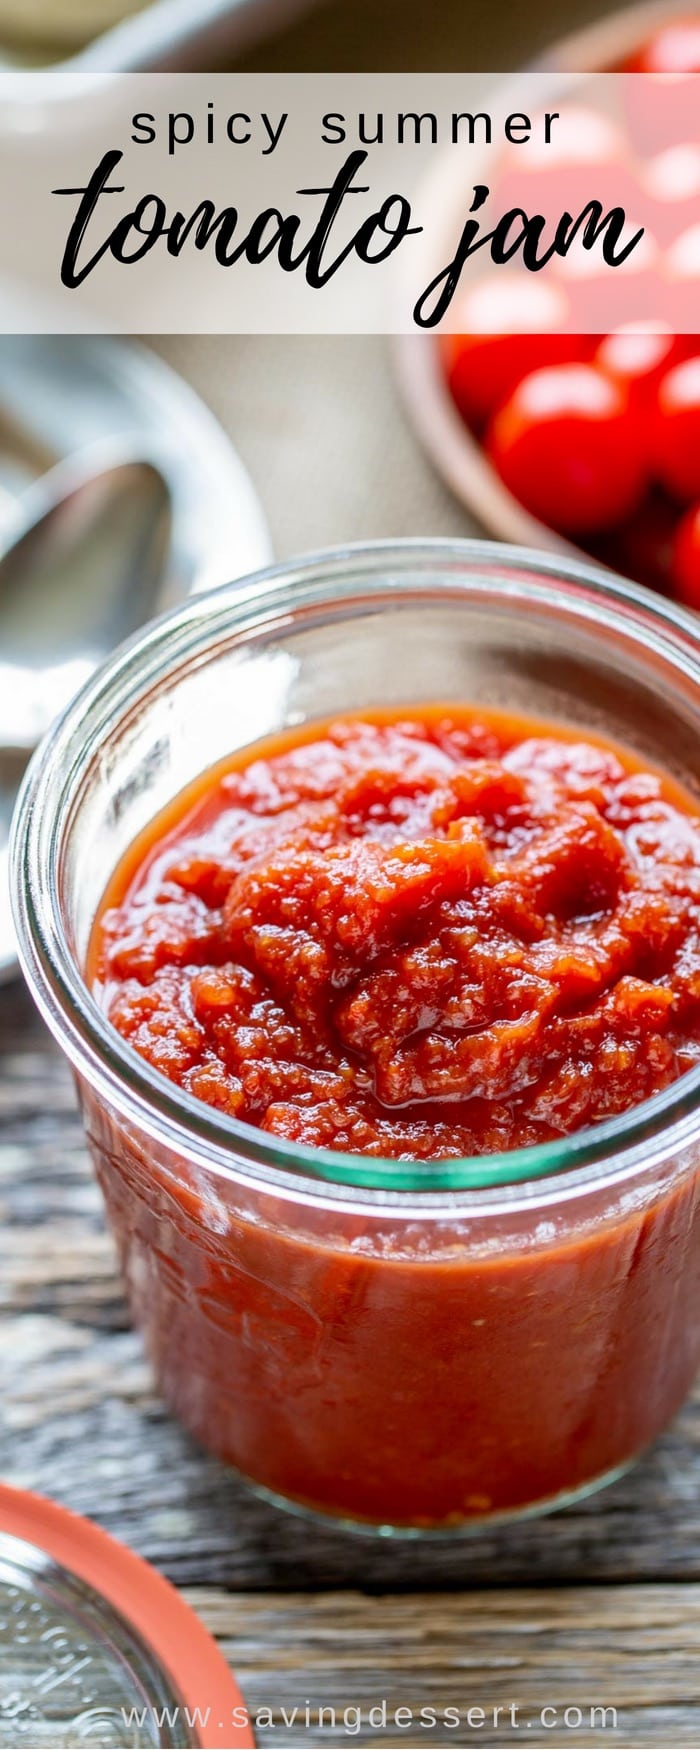 Spicy Summer Tomato Jam - Not too sweet, but loaded with rich flavor. Great slathered on a biscuit or a grilled cheese sandwich. The possibilities are endless! #savingroomfordessert #tomato #jam #spicysummertomatojam #tomatojam #jelly